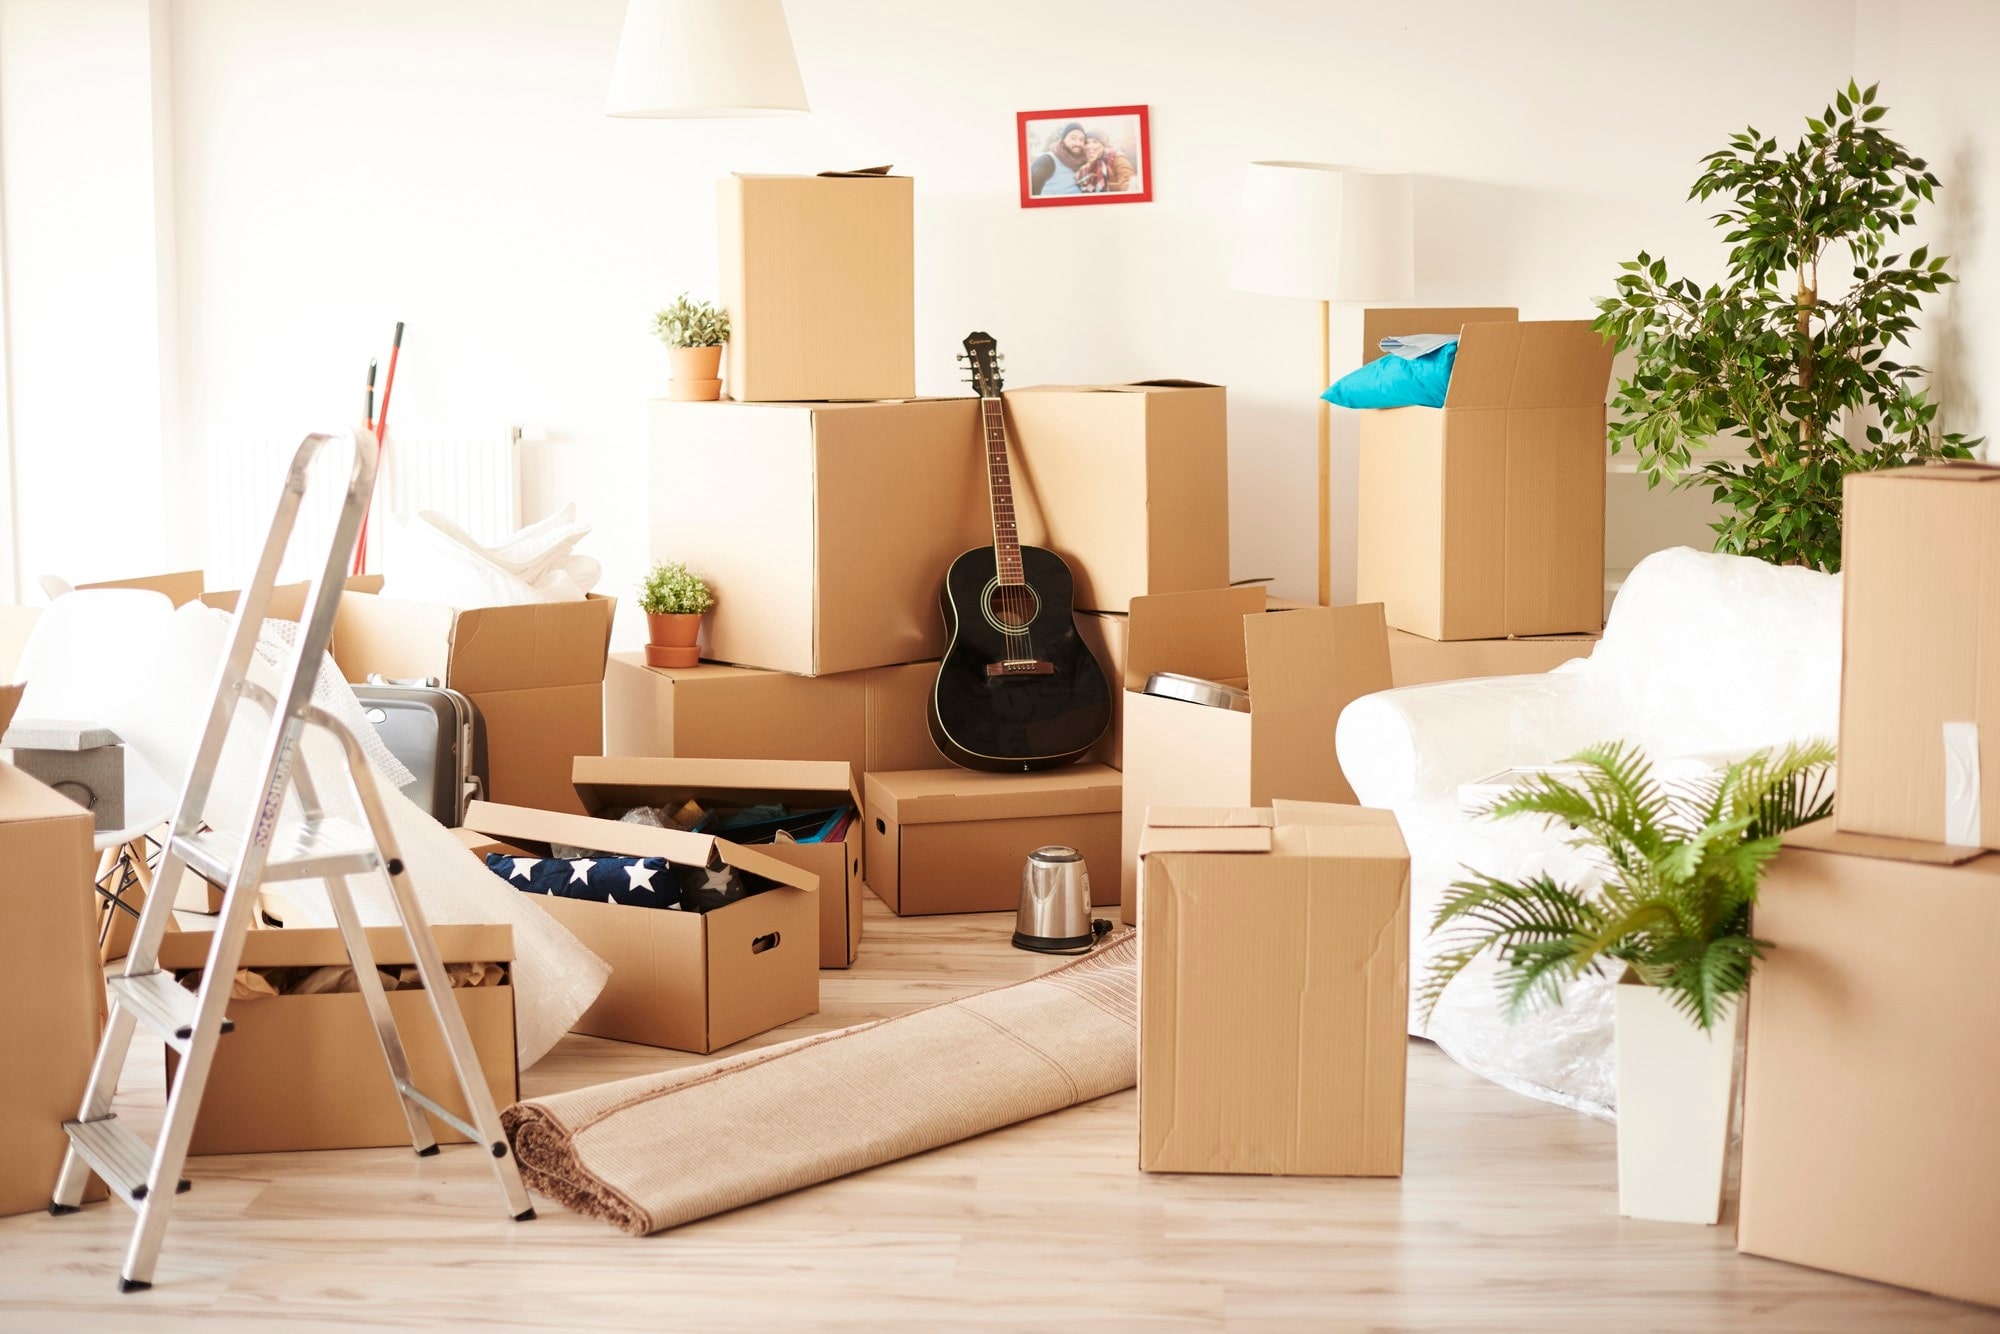 organizing, packing, selling, donating alre all part of downsizing and a senior professinoal move manager can help.